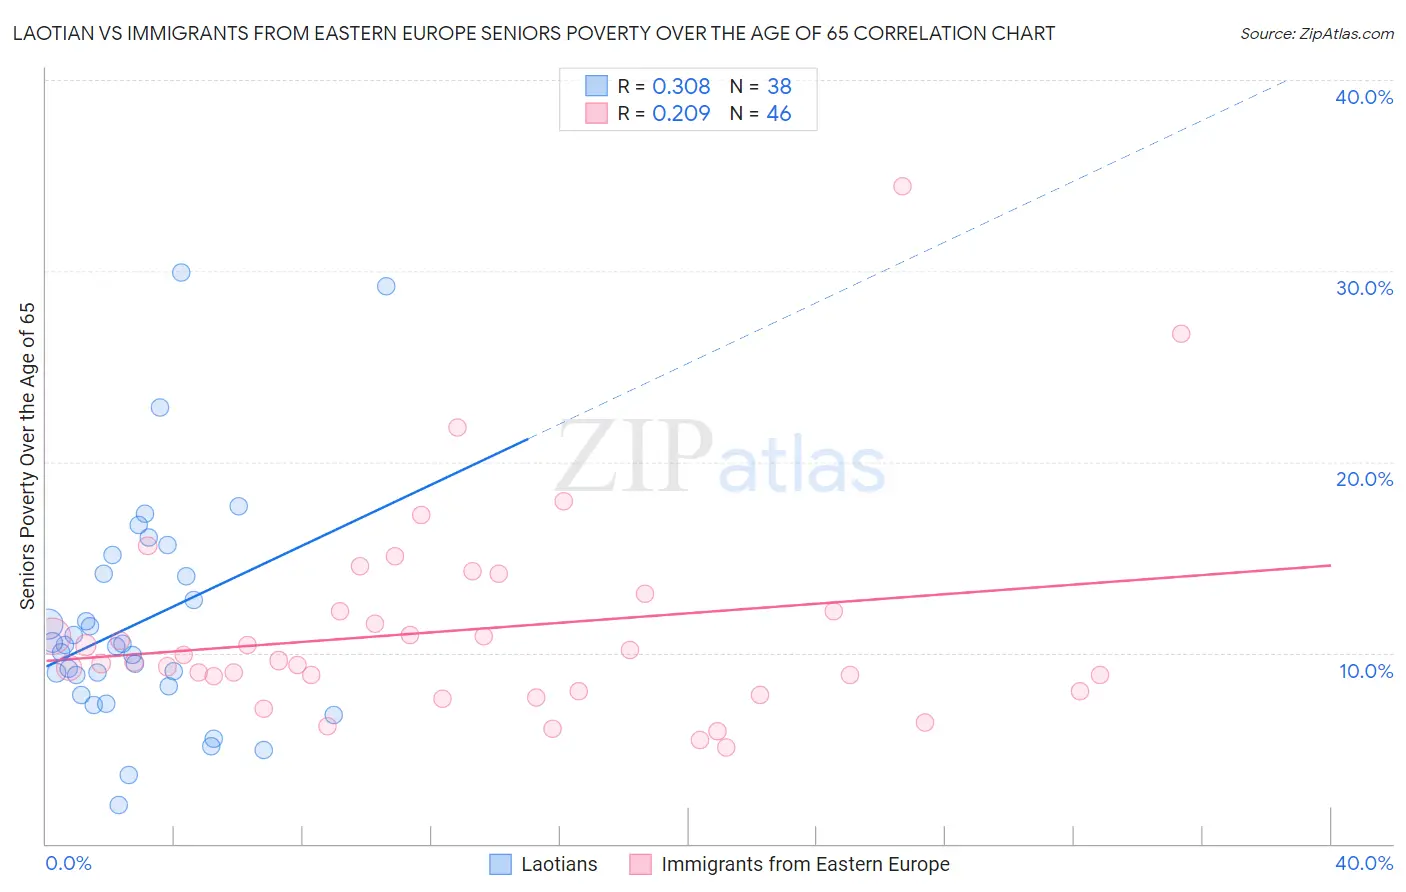 Laotian vs Immigrants from Eastern Europe Seniors Poverty Over the Age of 65